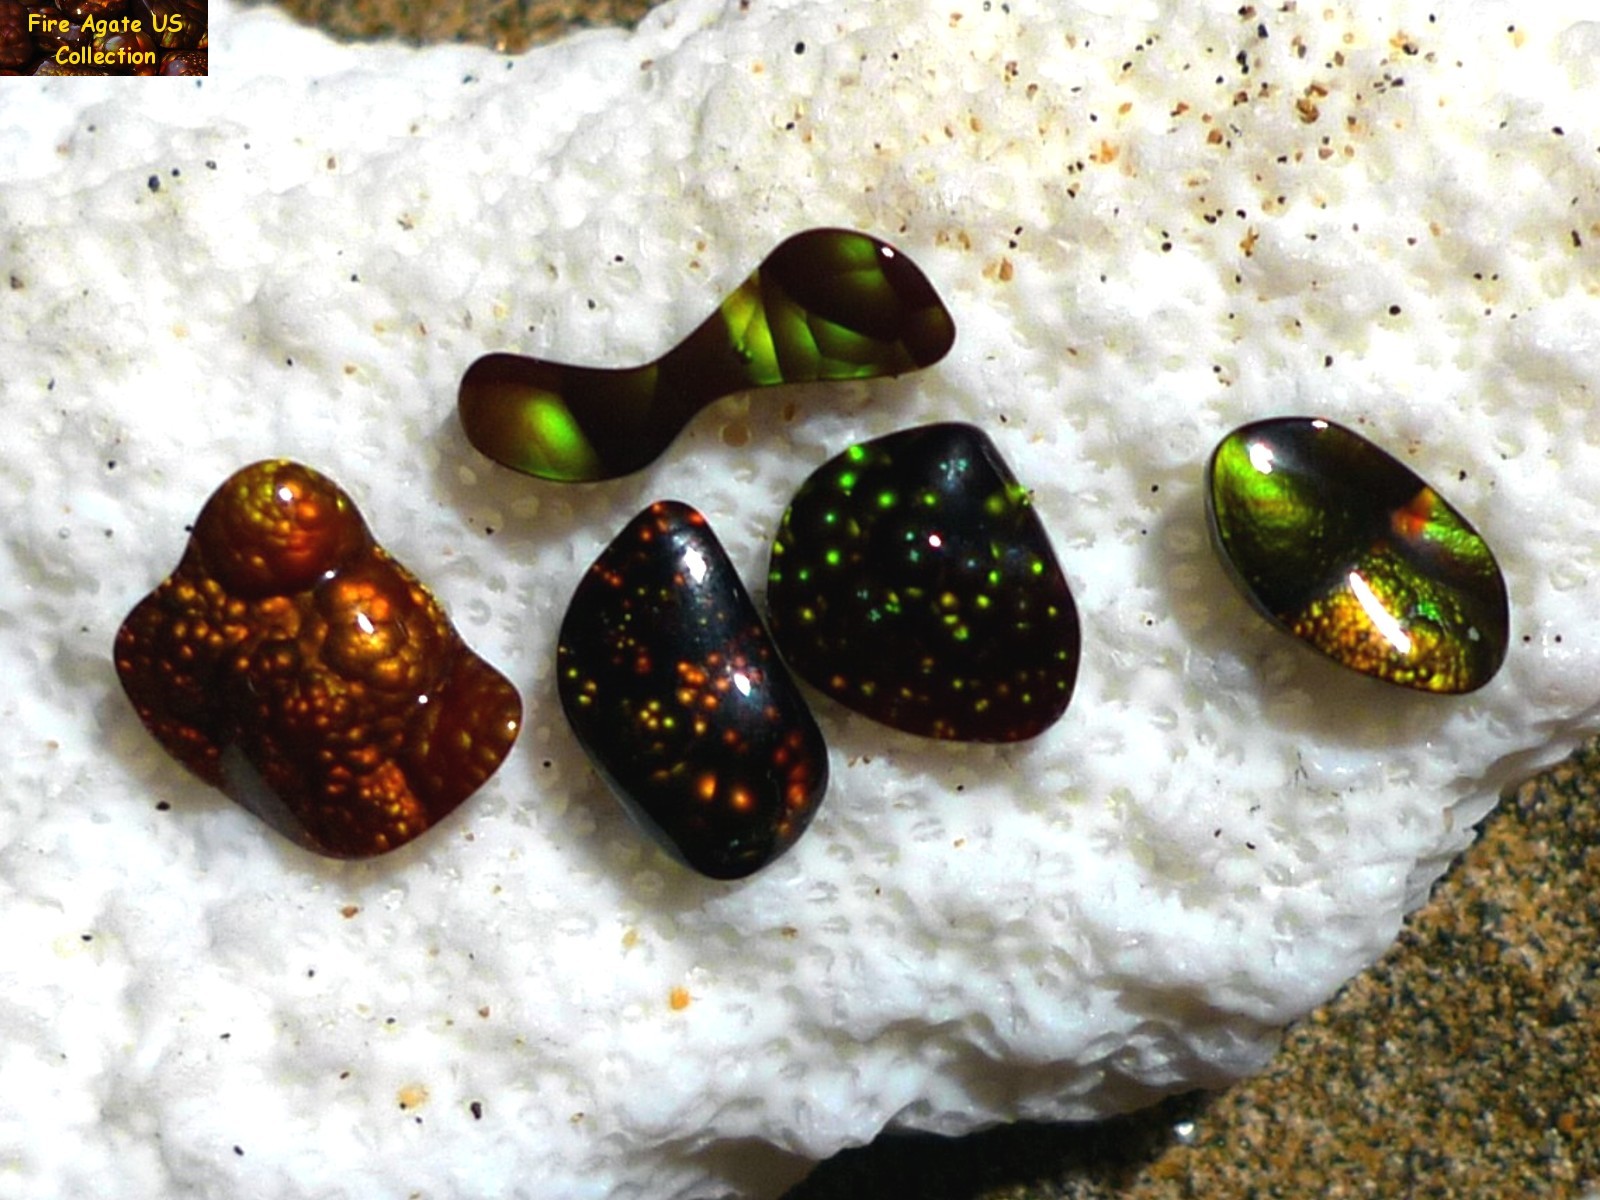 Group of Five Fire Agate Cabochons 4.6 Total Carat Weight Deer Creek Slaughter Mountain Arizona Gems SLG068 Photo 9